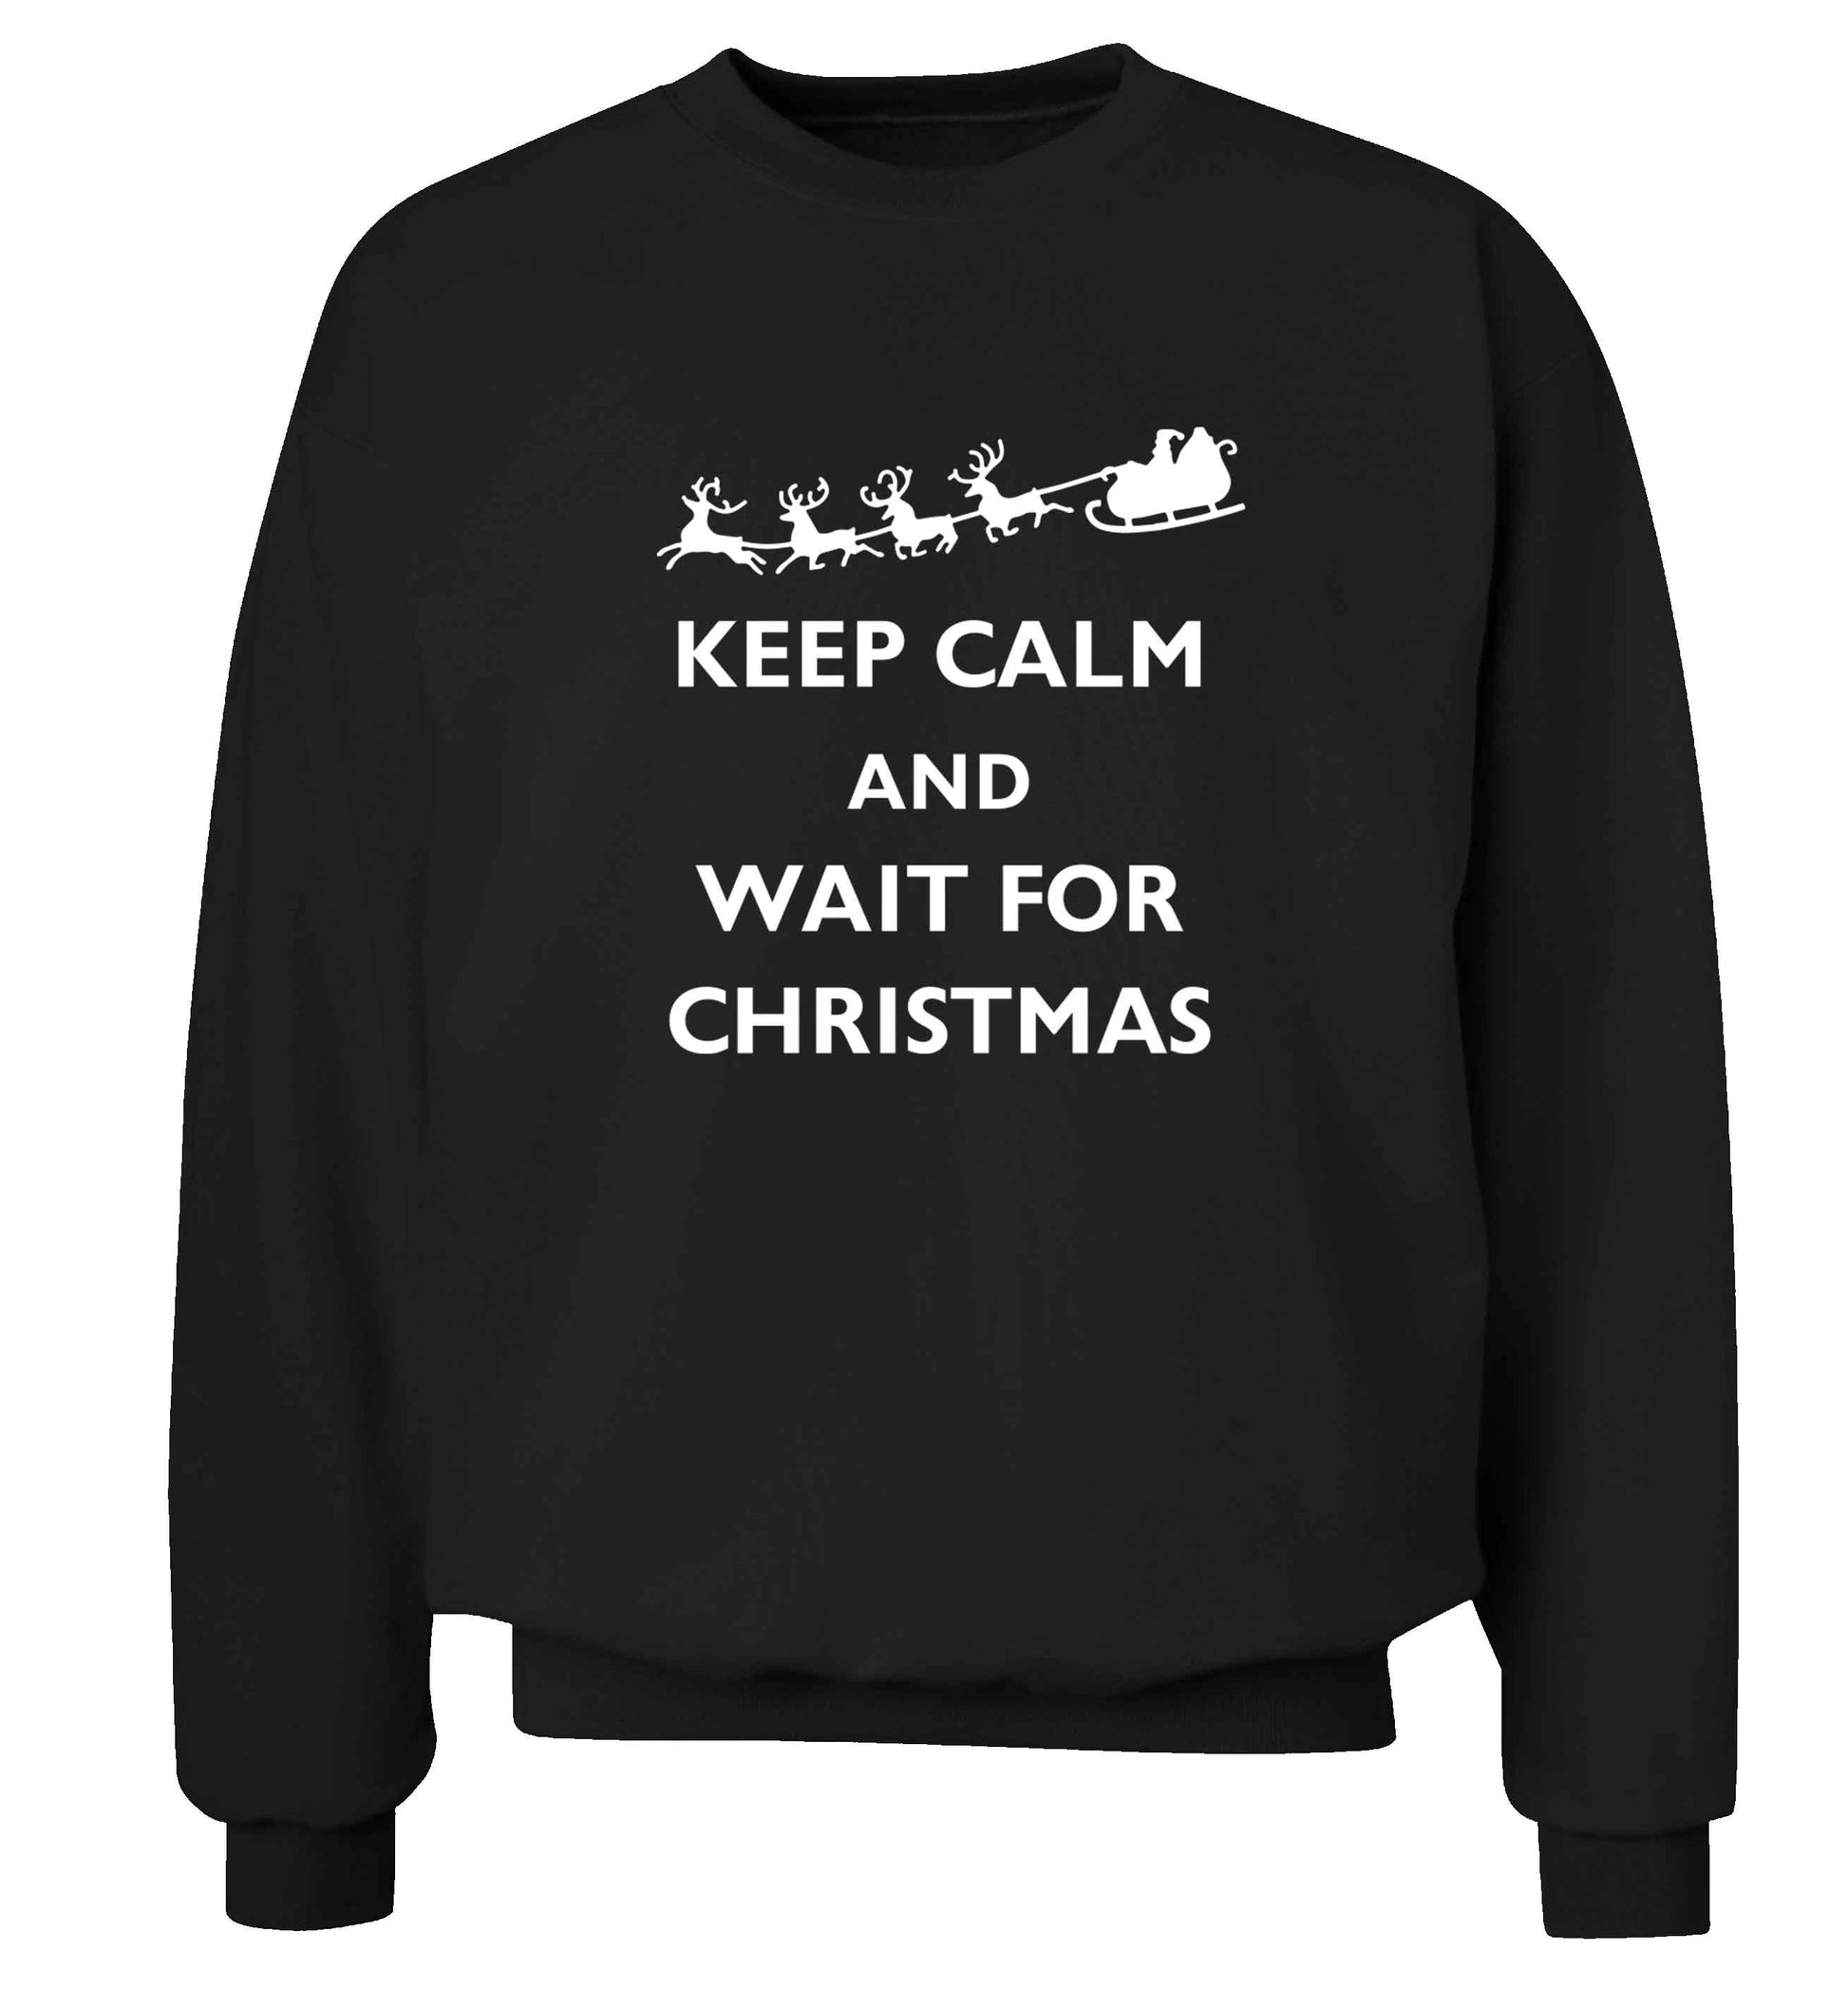 Keep calm and wait for Christmas adult's unisex black sweater 2XL